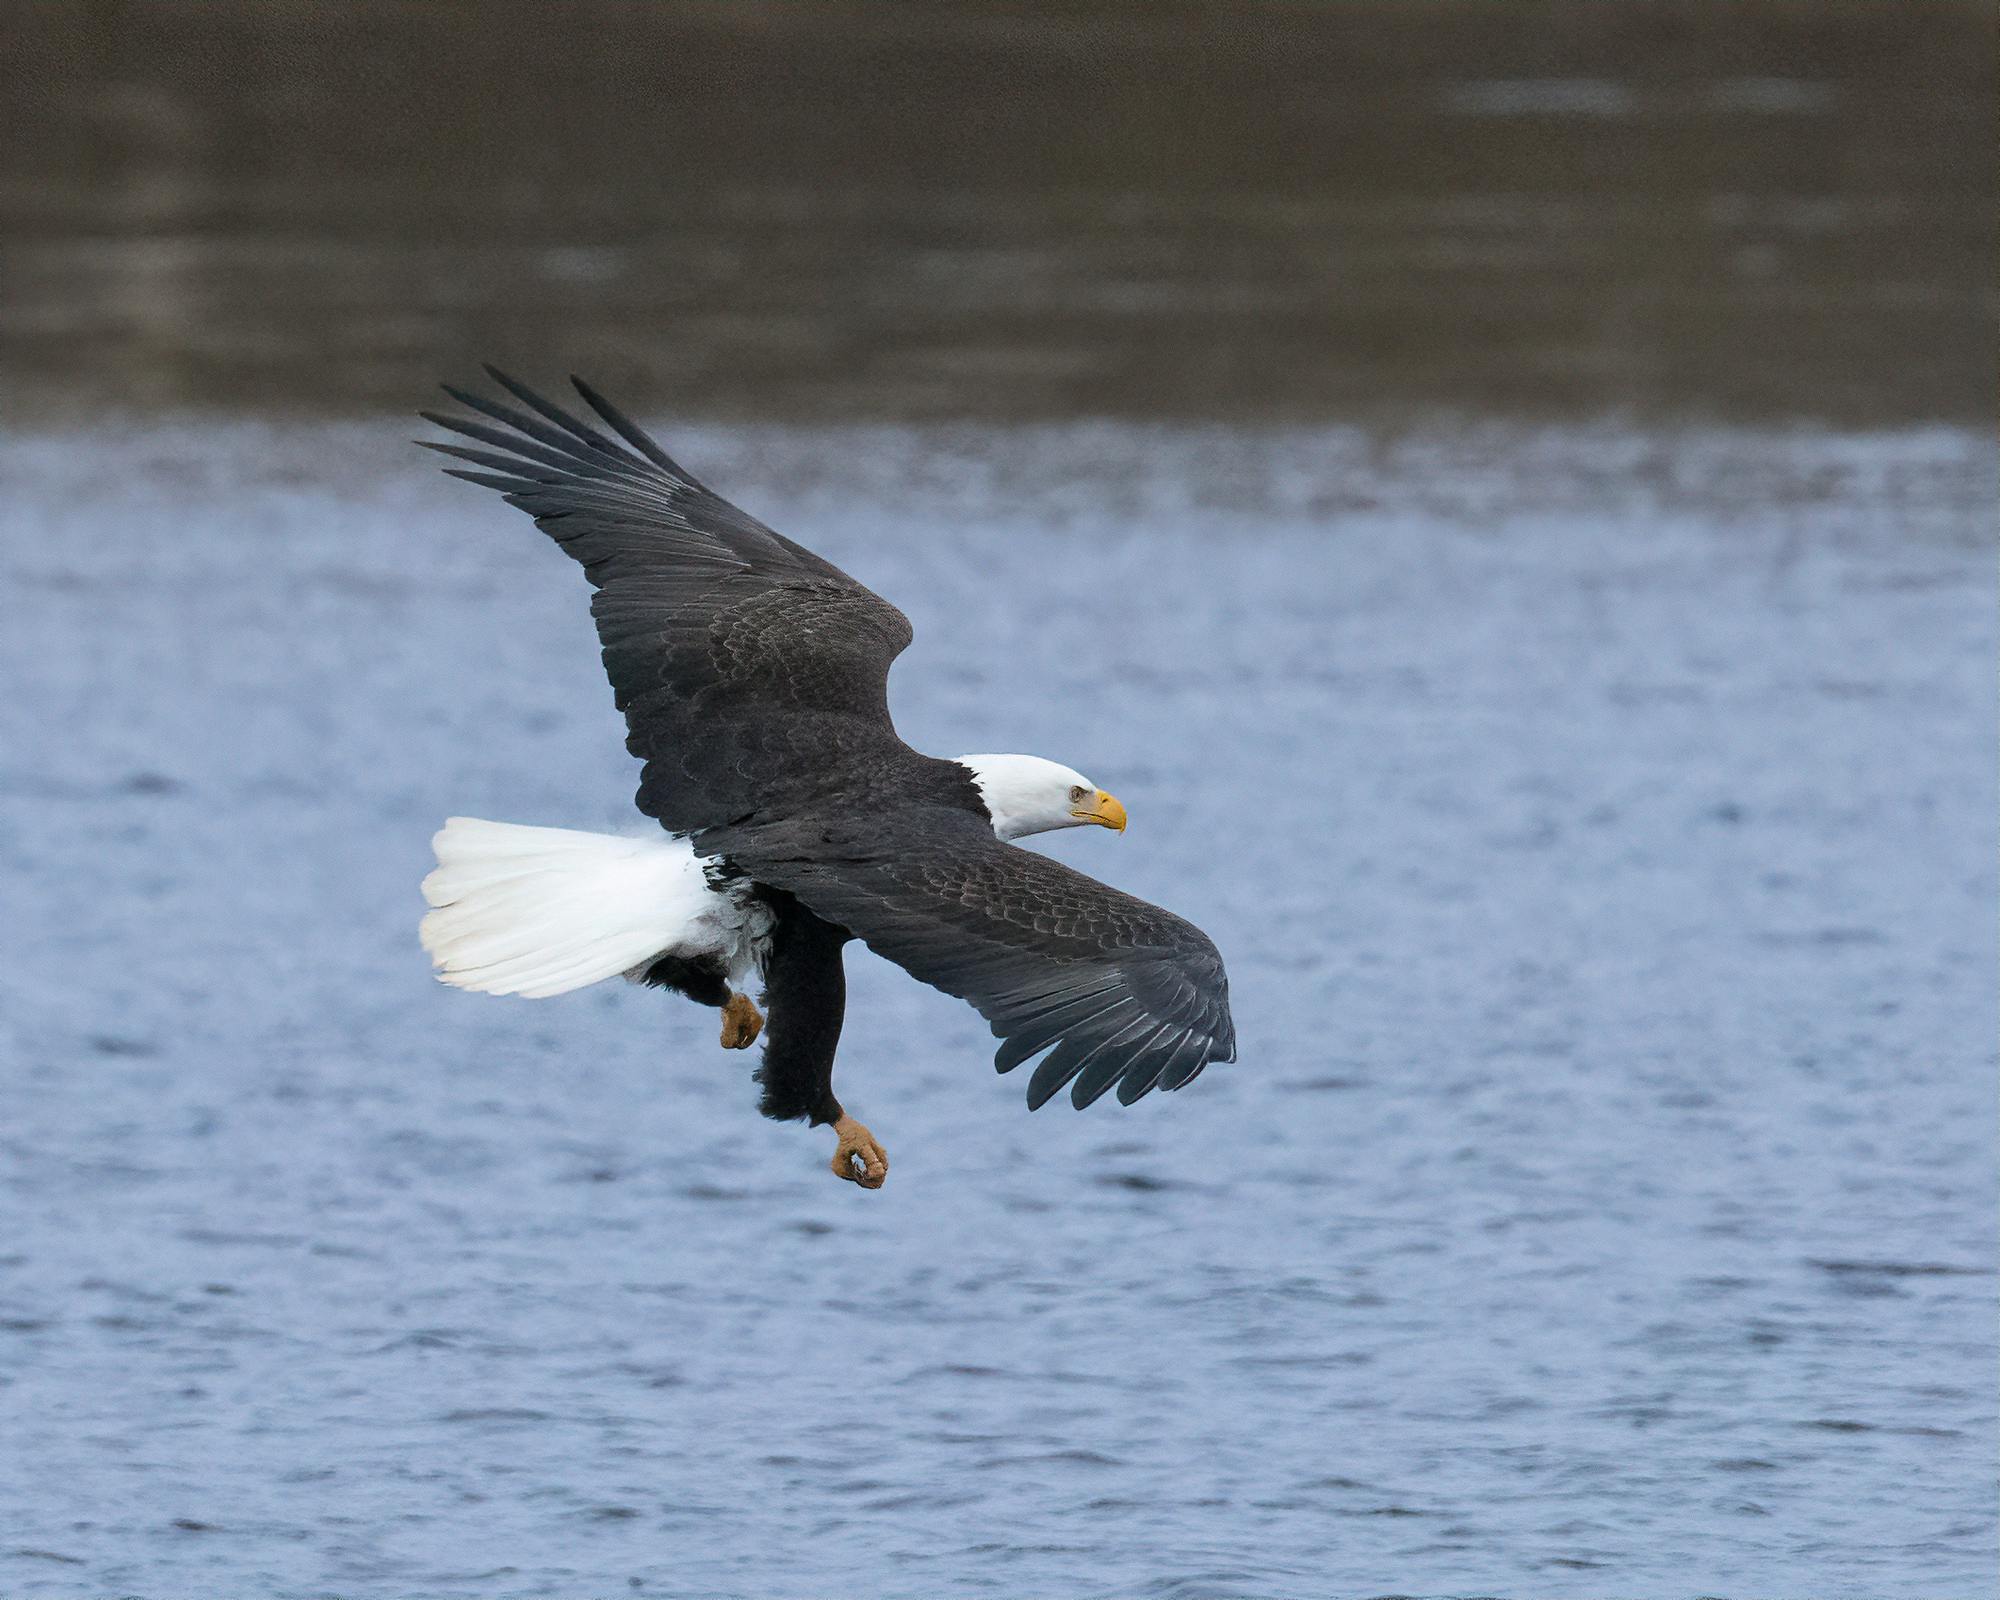 An eagle brakes, after spotting a fish in the water.